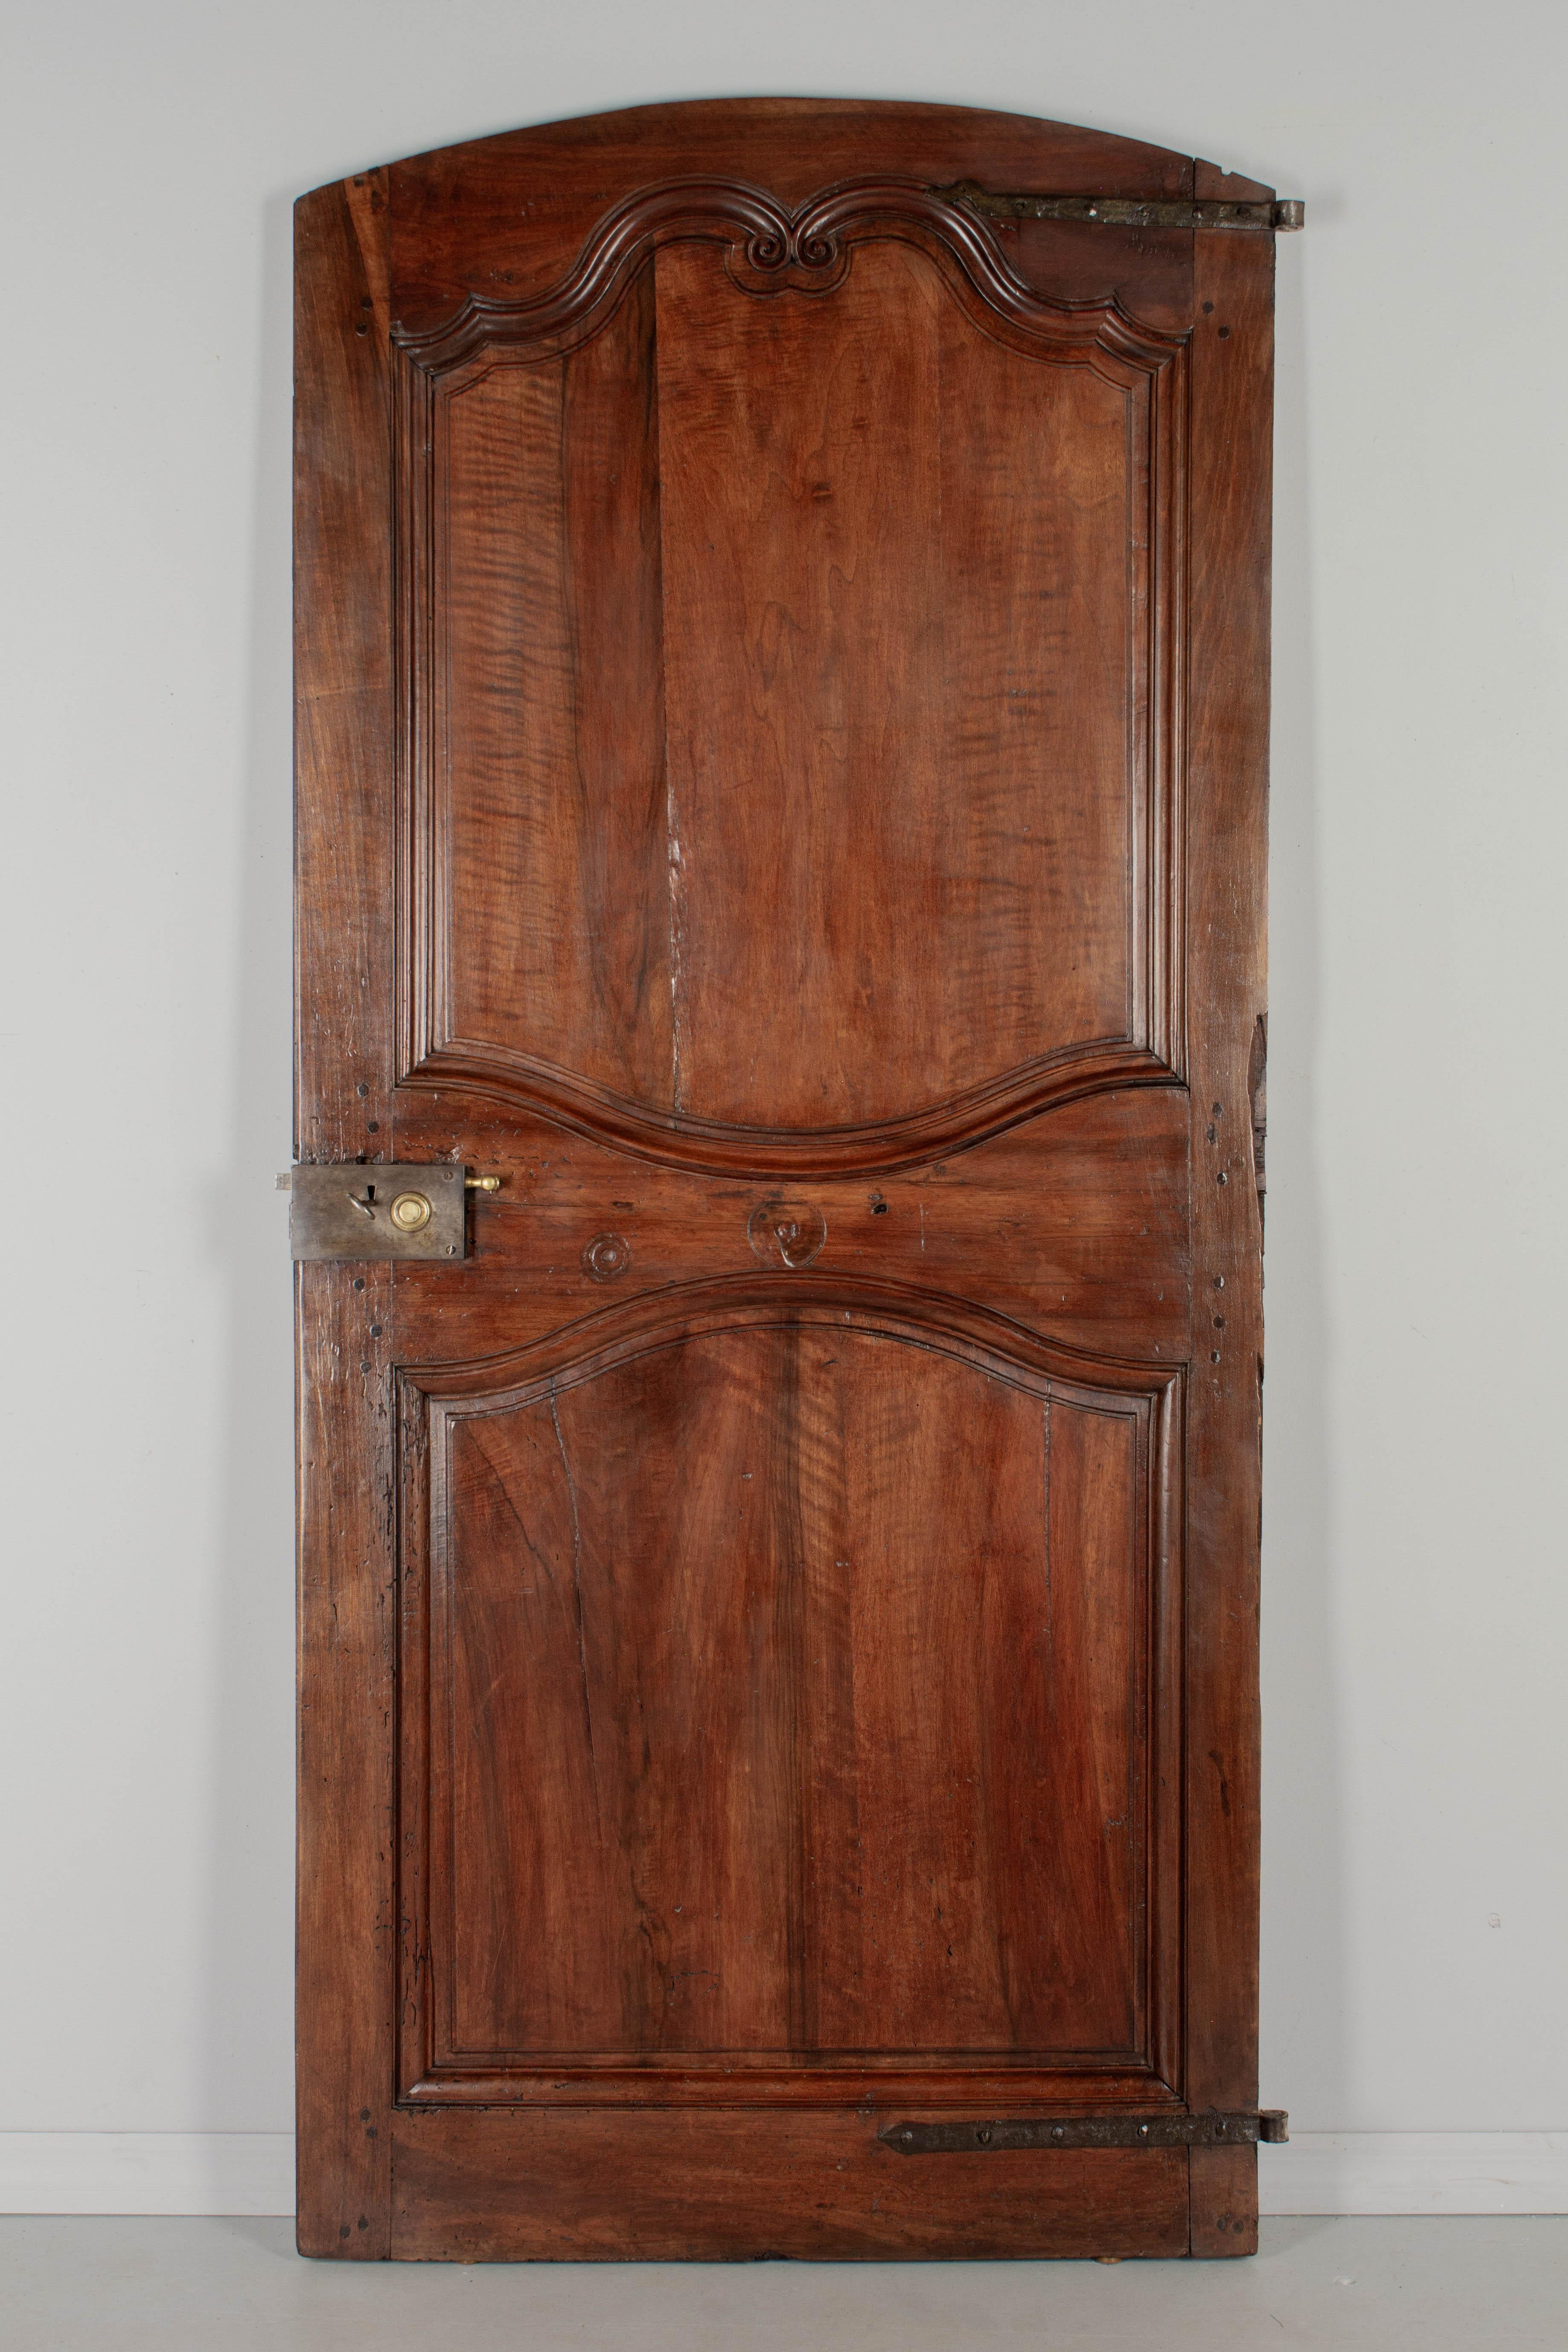 A 19th Century Louis XV style walnut door from the Loire Valley. This two sided interior door is made of thick planks of solid walnut with hand carved scroll decoration typical of the region. Large iron hinges. Working lock and key with brass knob